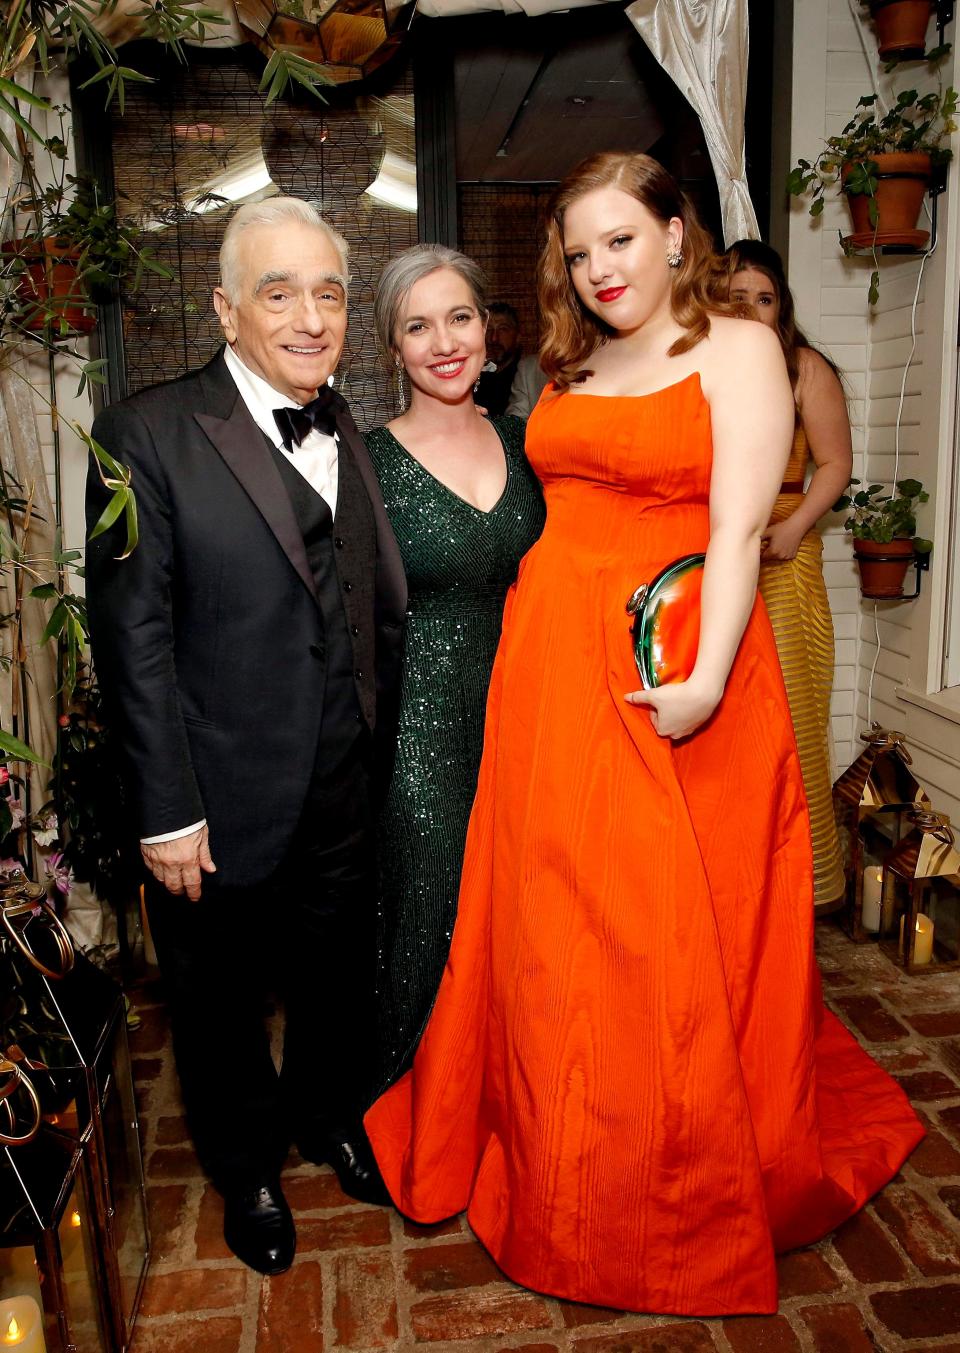 Martin Scorsese, daughter Domenica Cameron-Scorsese and Francesca Scorsese at an Oscars after-party in February.